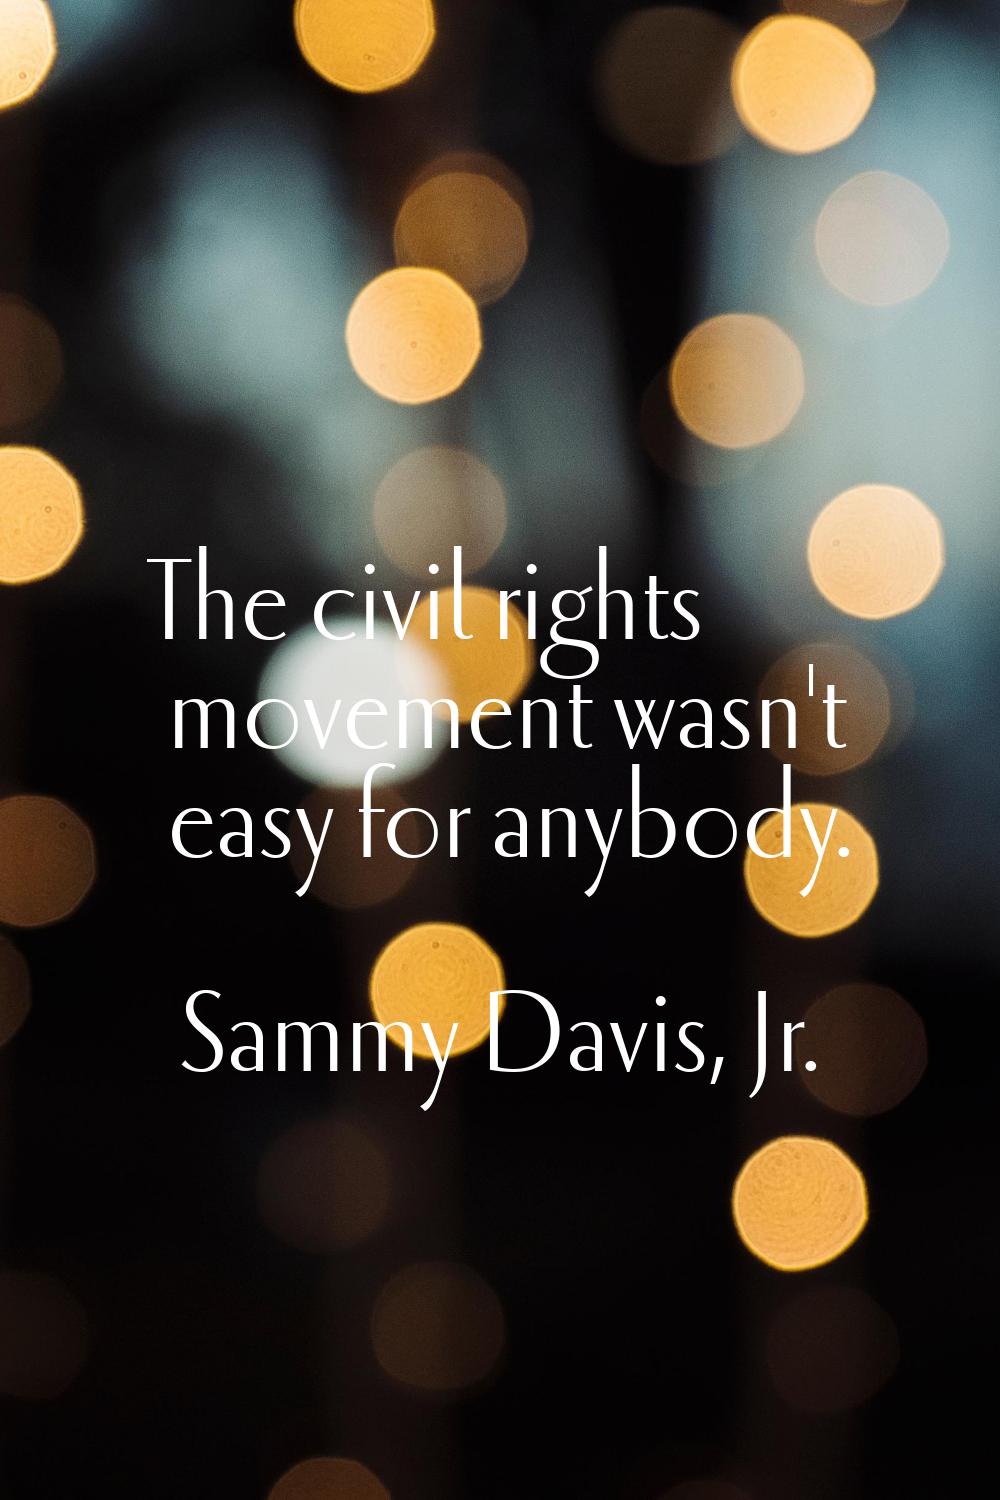 The civil rights movement wasn't easy for anybody.